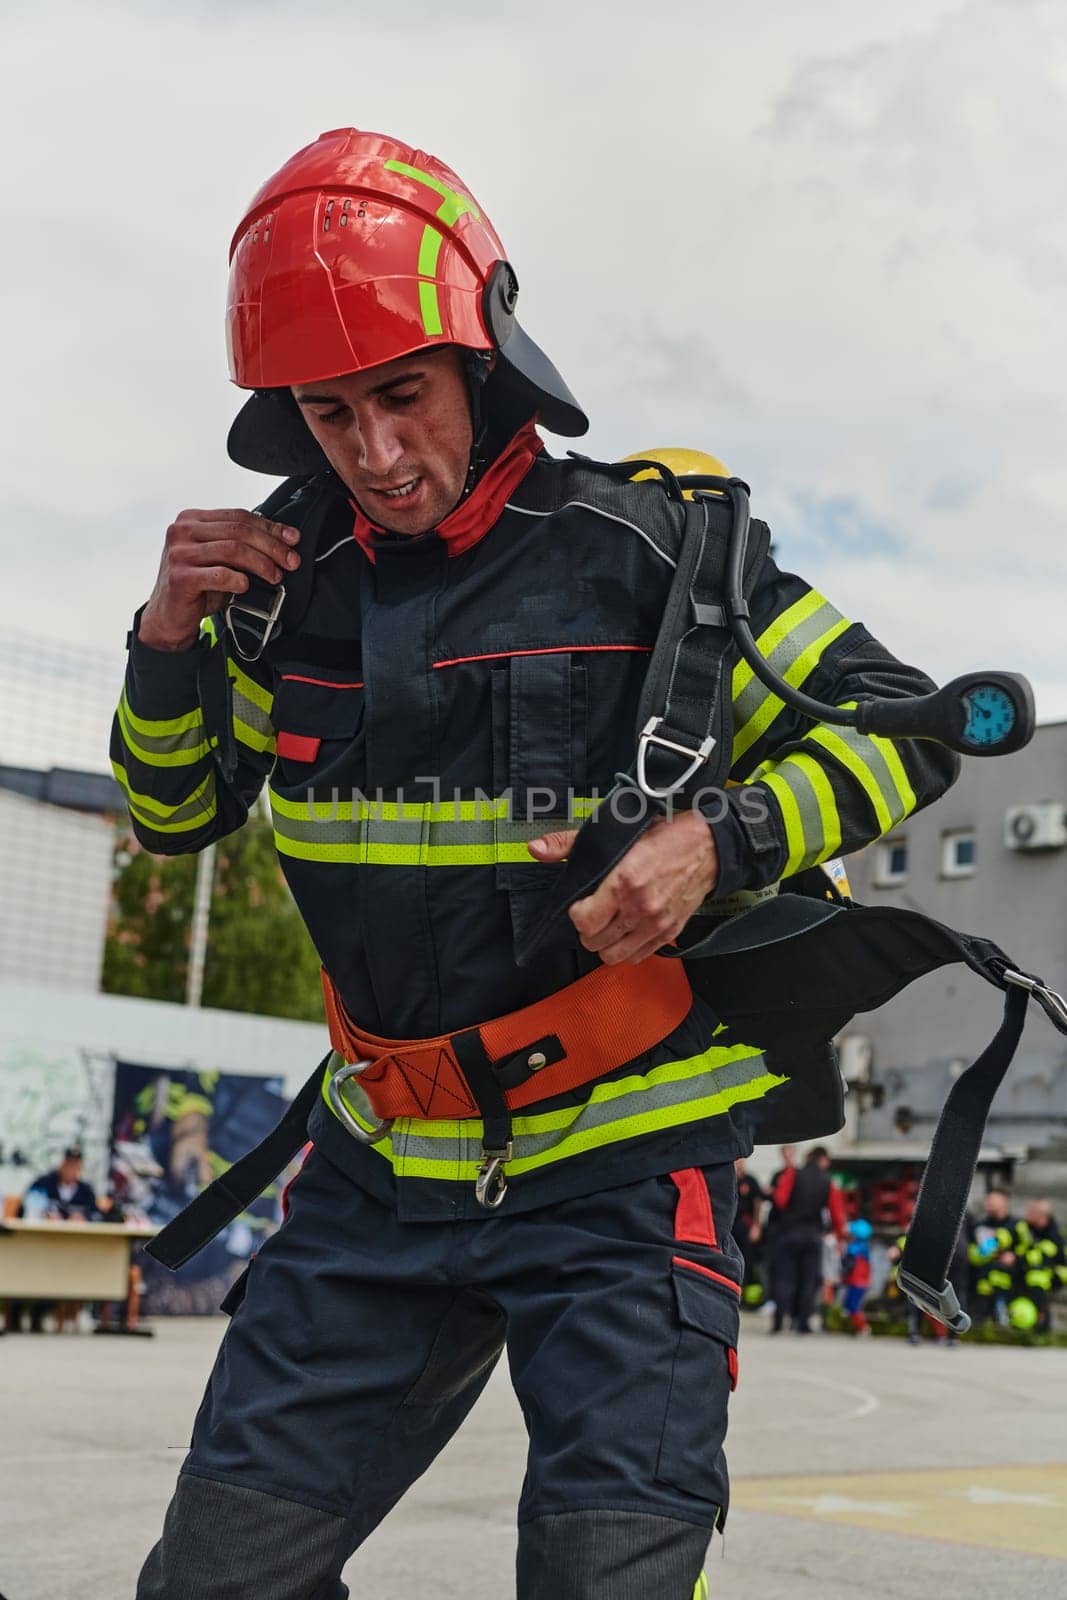 Professional Firefighter Suits Up in Full Gear for Duty by dotshock